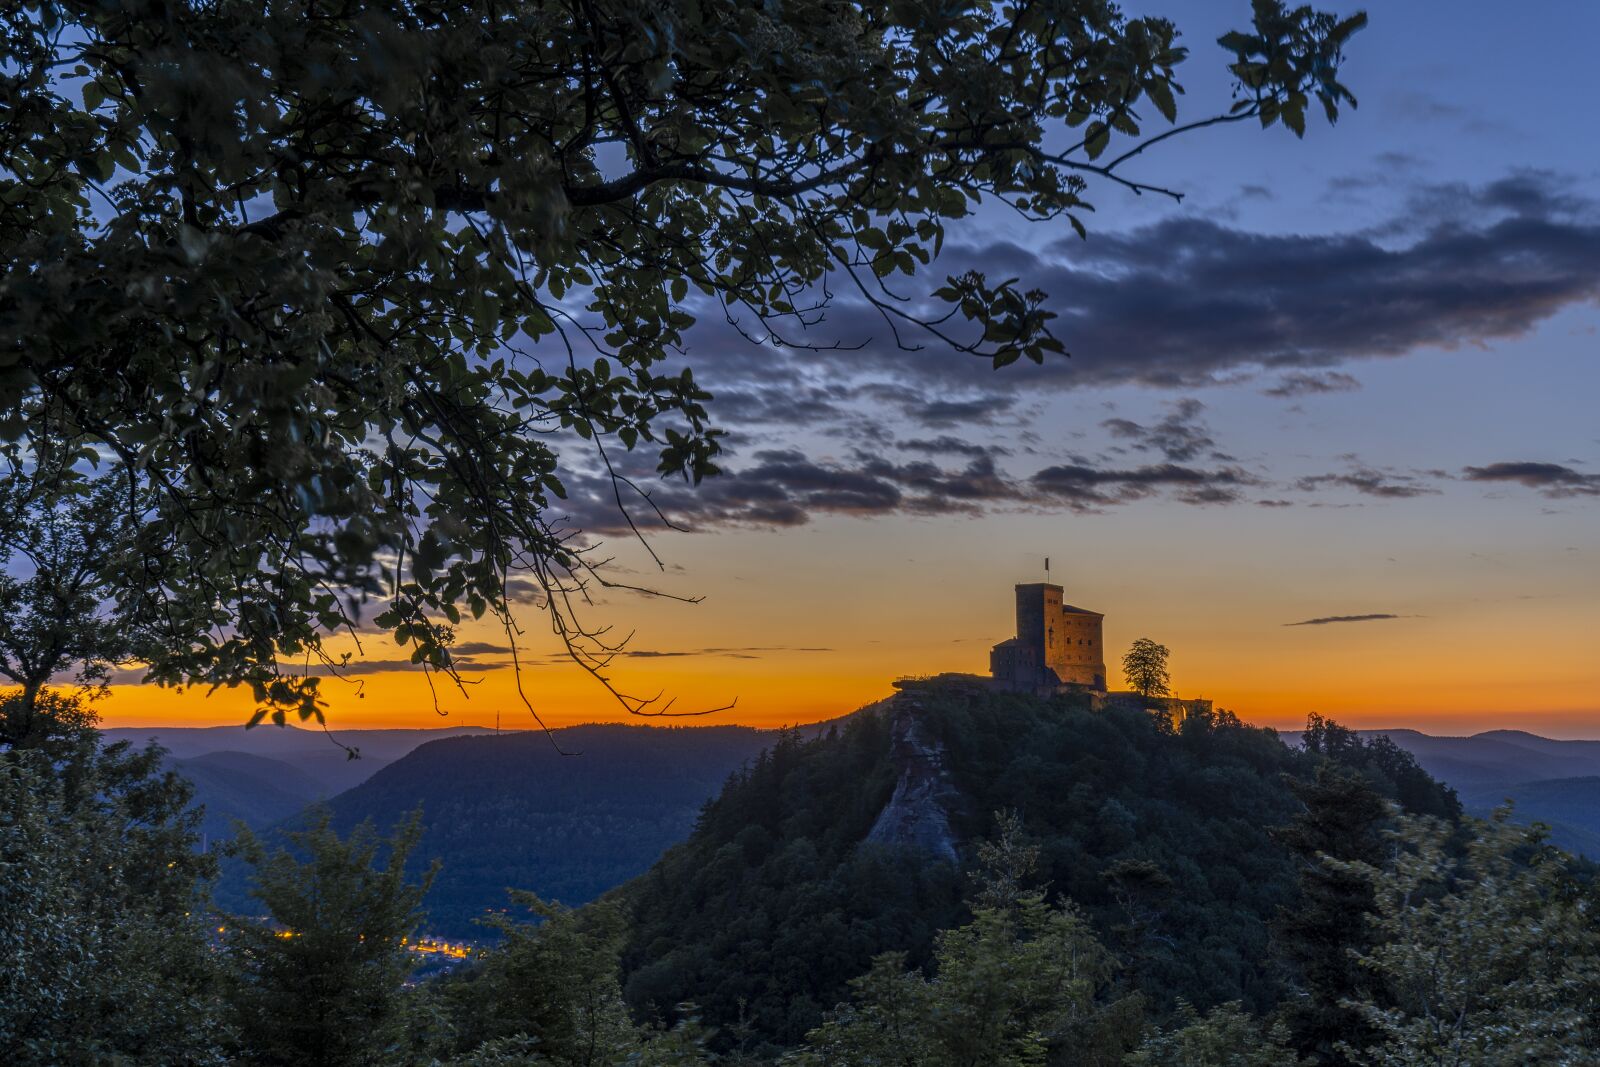 Sony a7 III sample photo. Castle trifels, palatinate forest photography